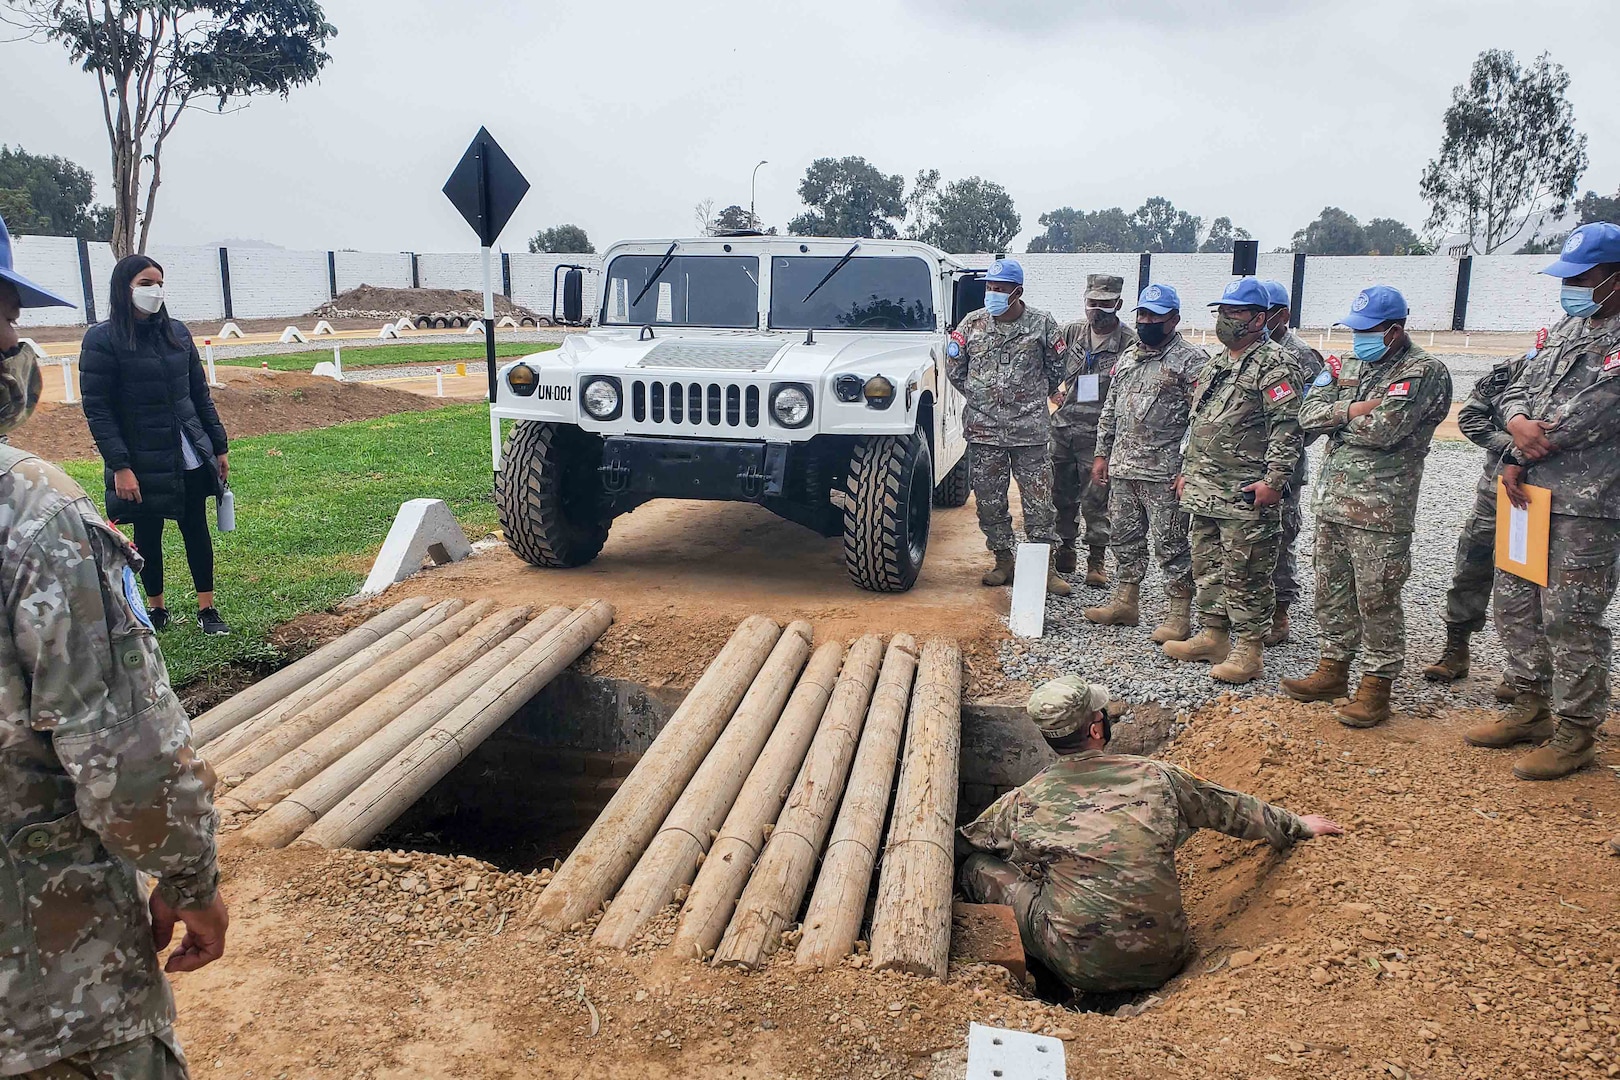 West Virginia National Guardsmen show members of the Peruvian military how to do field maintenance of Humvees. The Peruvian soldiers deployed as part of an international peacekeeping mission in the Central African Republic.